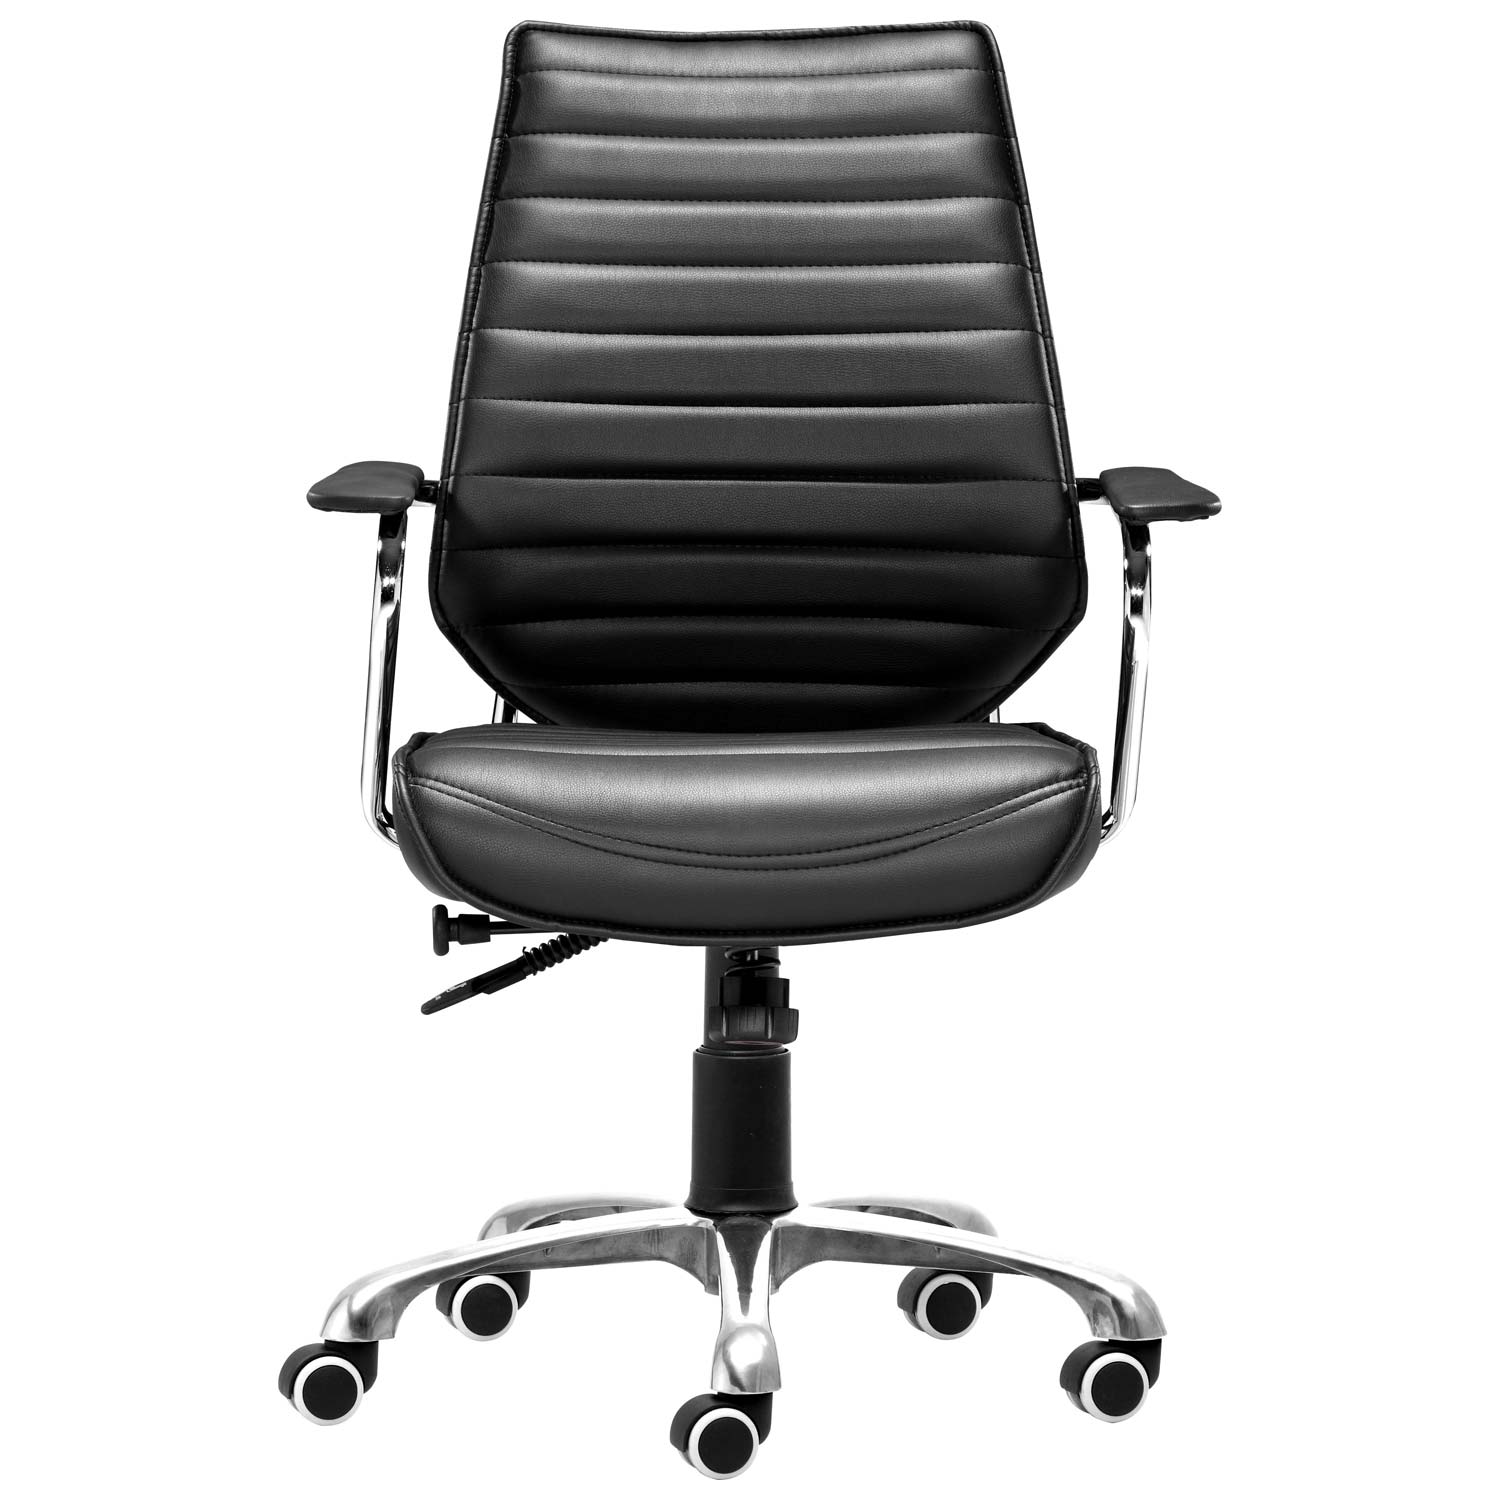 Enterprise Low Back Ribbed Office Chair - Chrome Steel, Black | DCG Stores